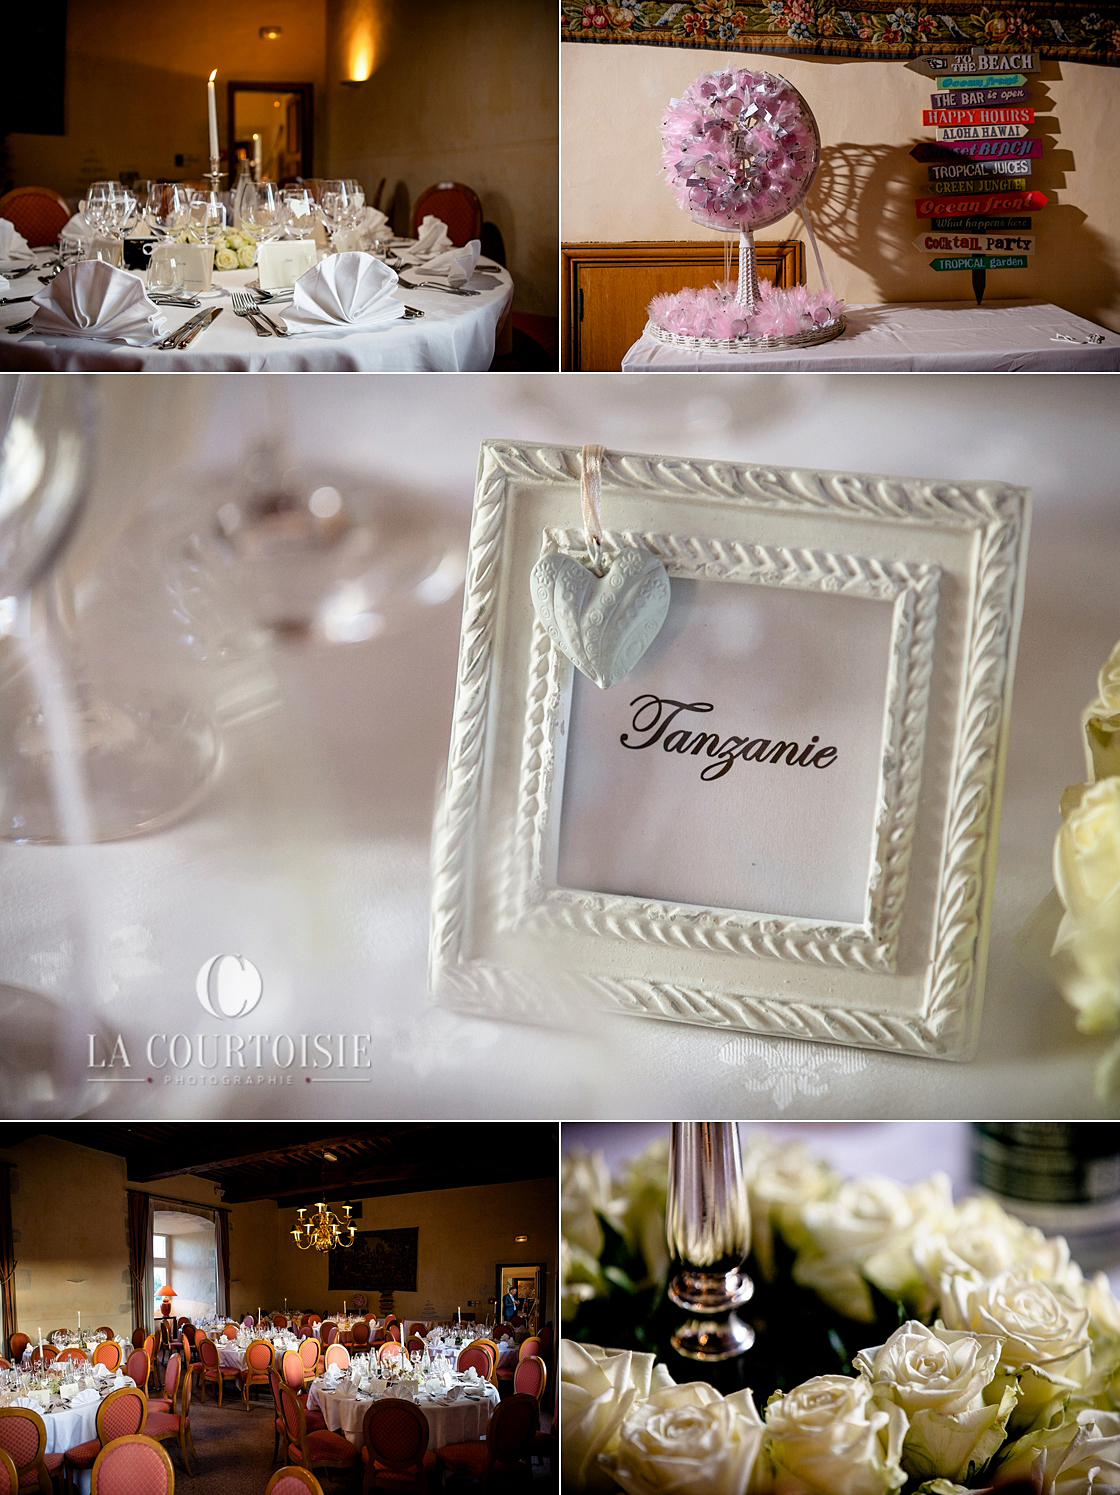 photo deco table mariage dijon bourgogne chailly